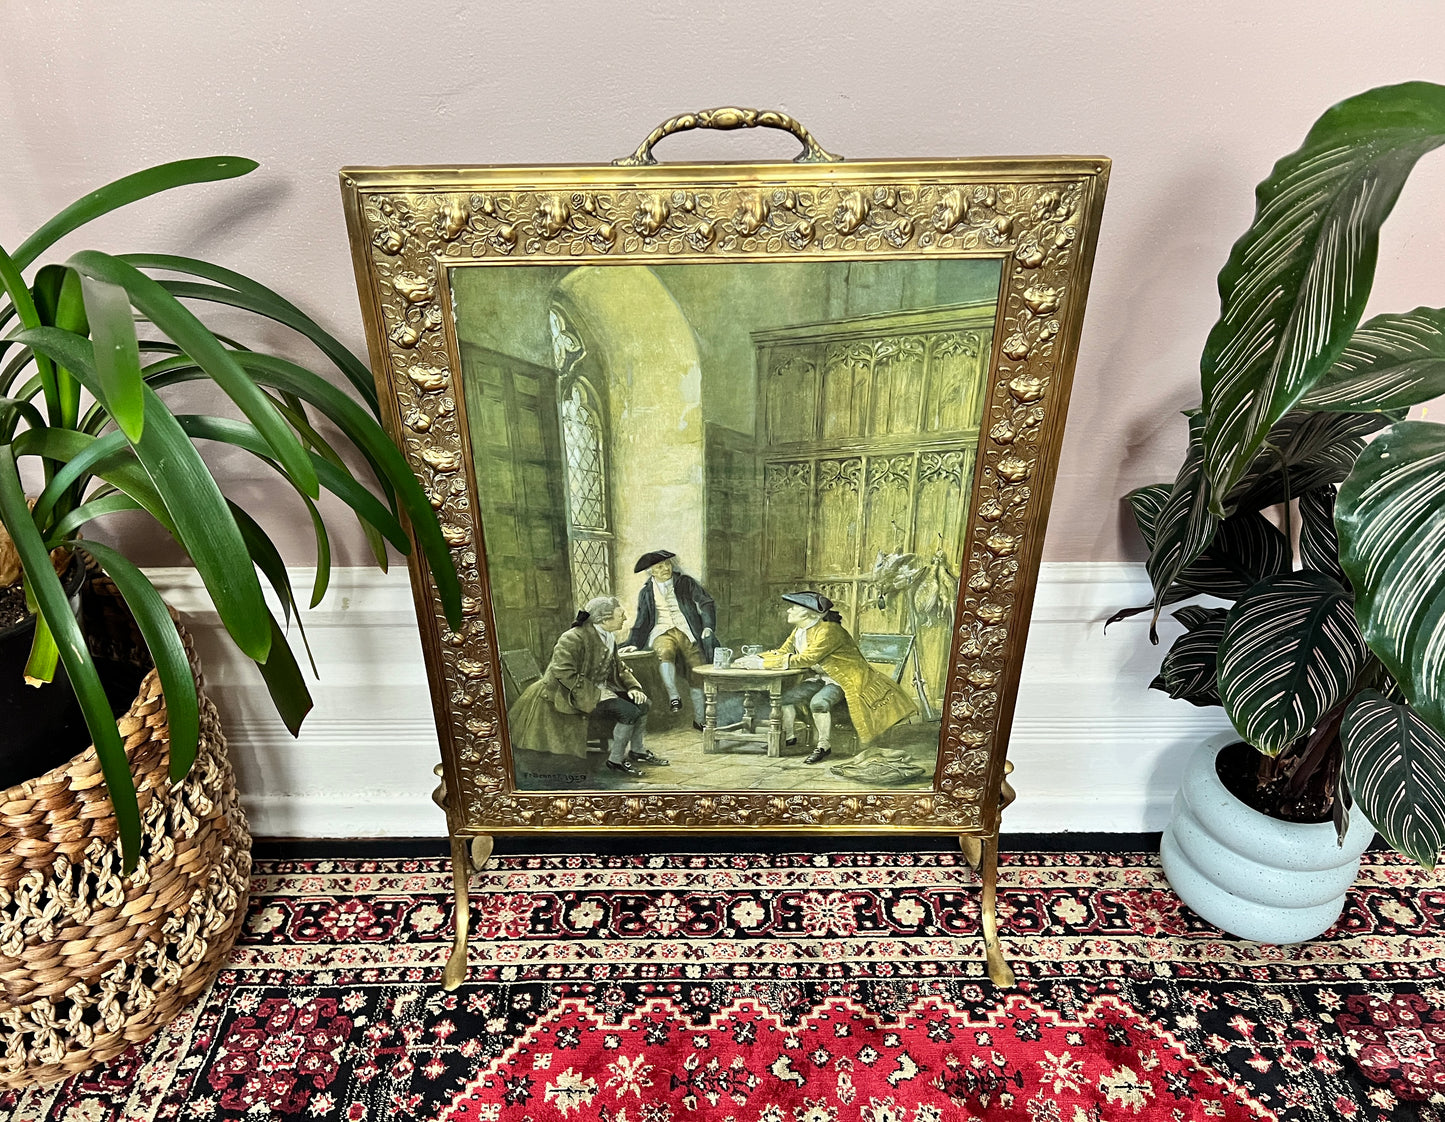 Antique Brass Draft Fireplace Screen With Painting Image of Three Men from the Revolutionary Era